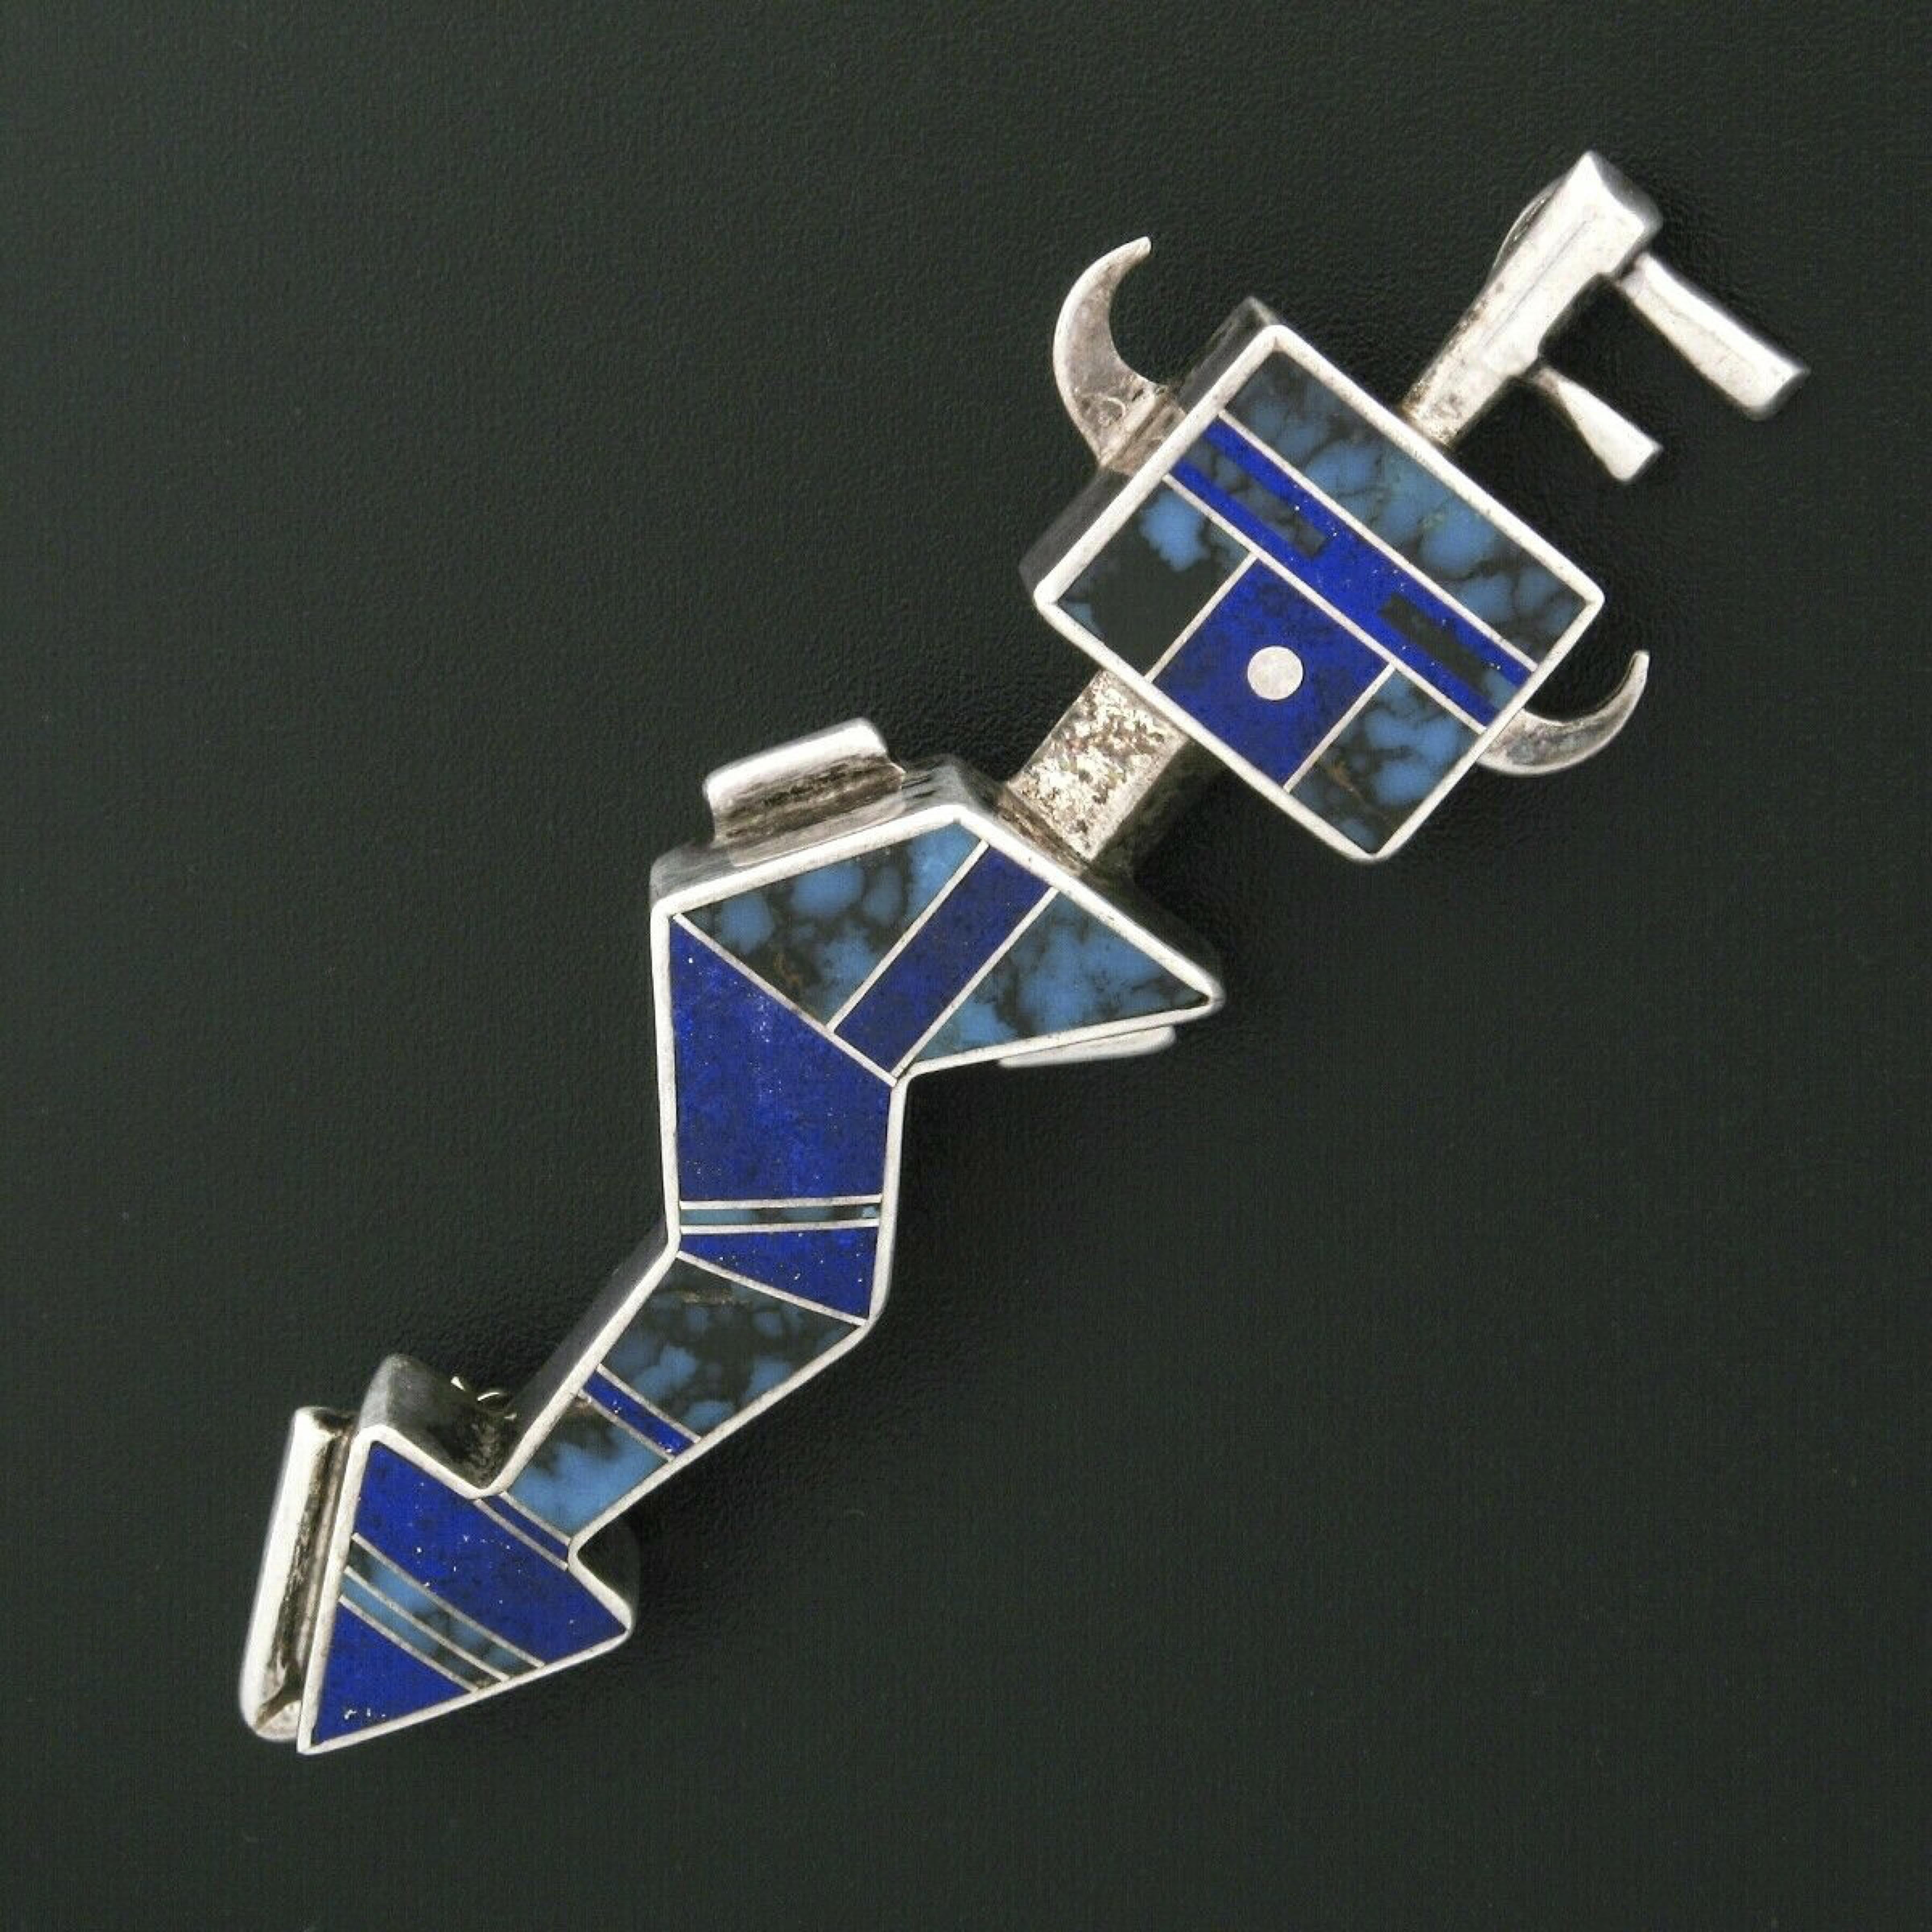 This unique hand made Navajo brooch or pendant was crafted from solid 925 sterling silver by Ray Tracey and Knifewing Segura. It features a broken arrow design that is perfectly inlaid with numerous natural lapis and turquoise stones. This piece can